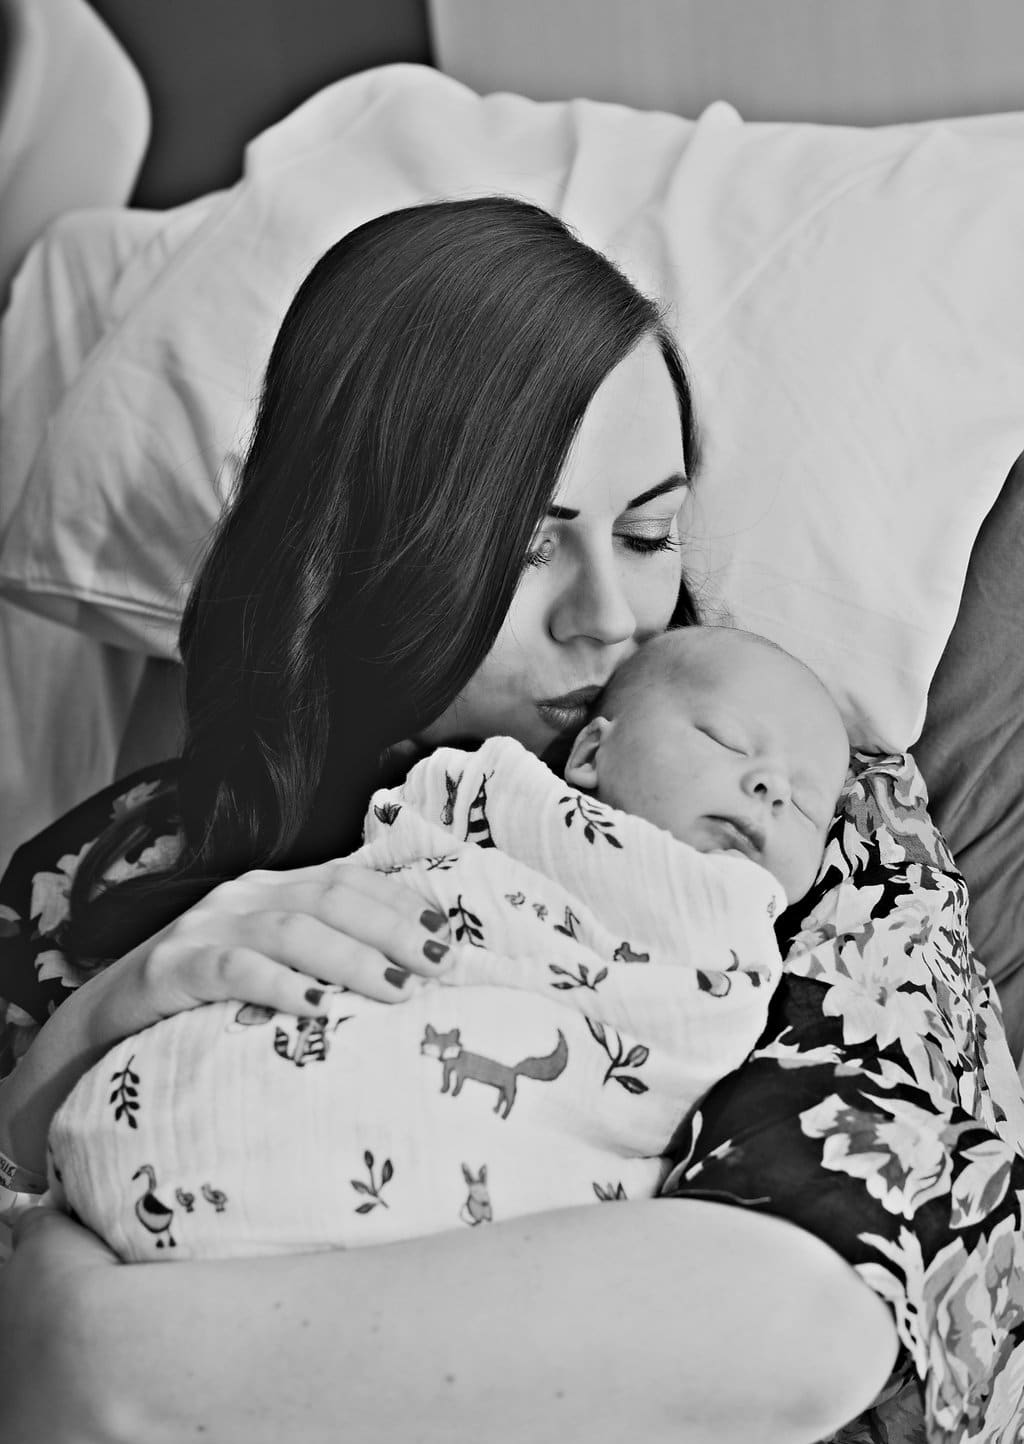 New mother pictures: mom kissing the newborn baby birth story photography. 